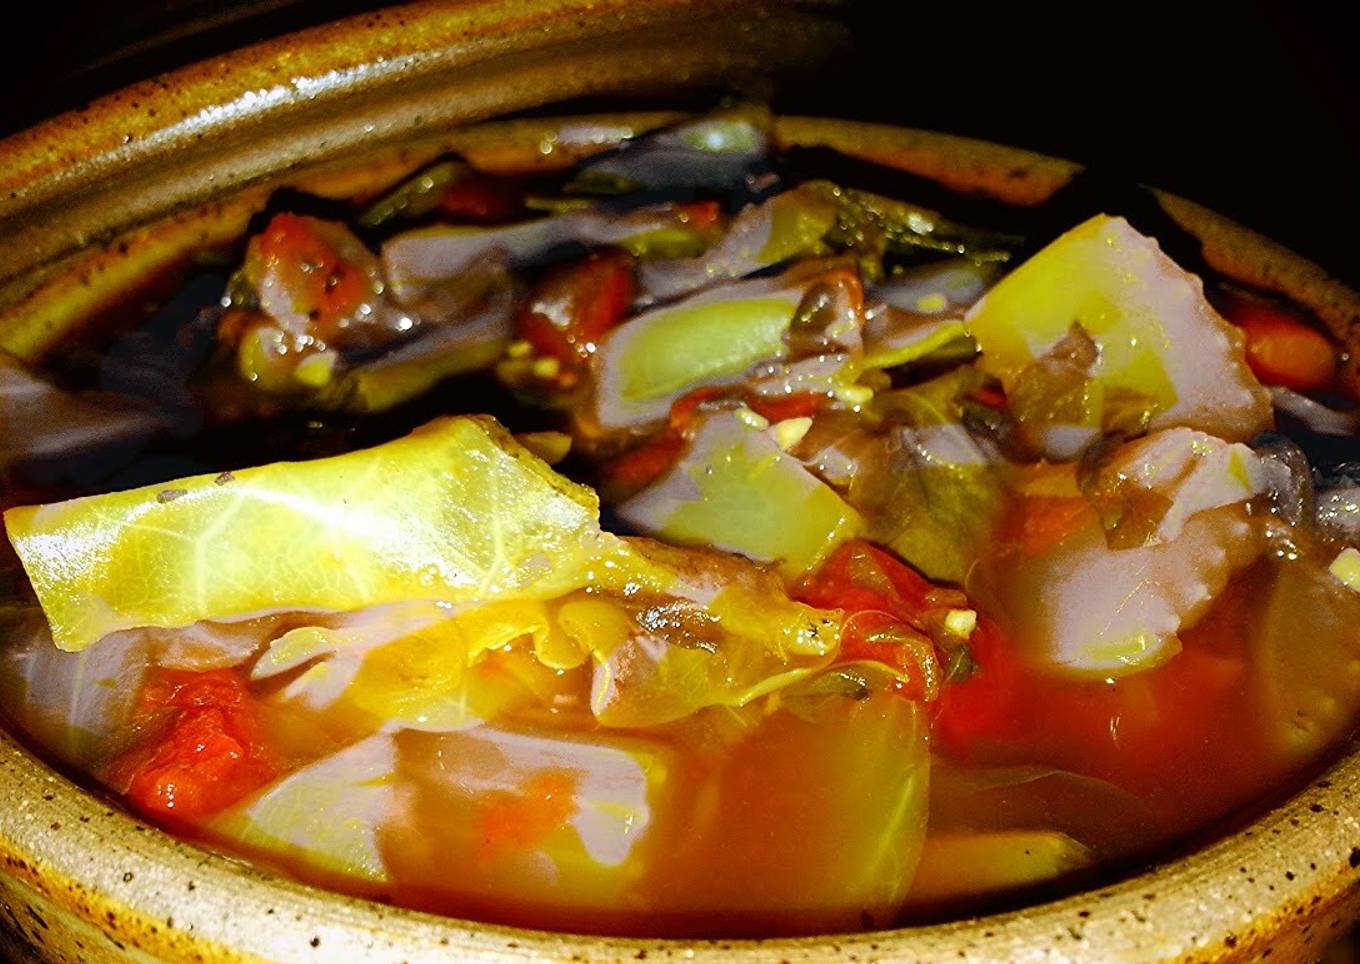 Mike's Negative Calorie Vegetable Beef Soup